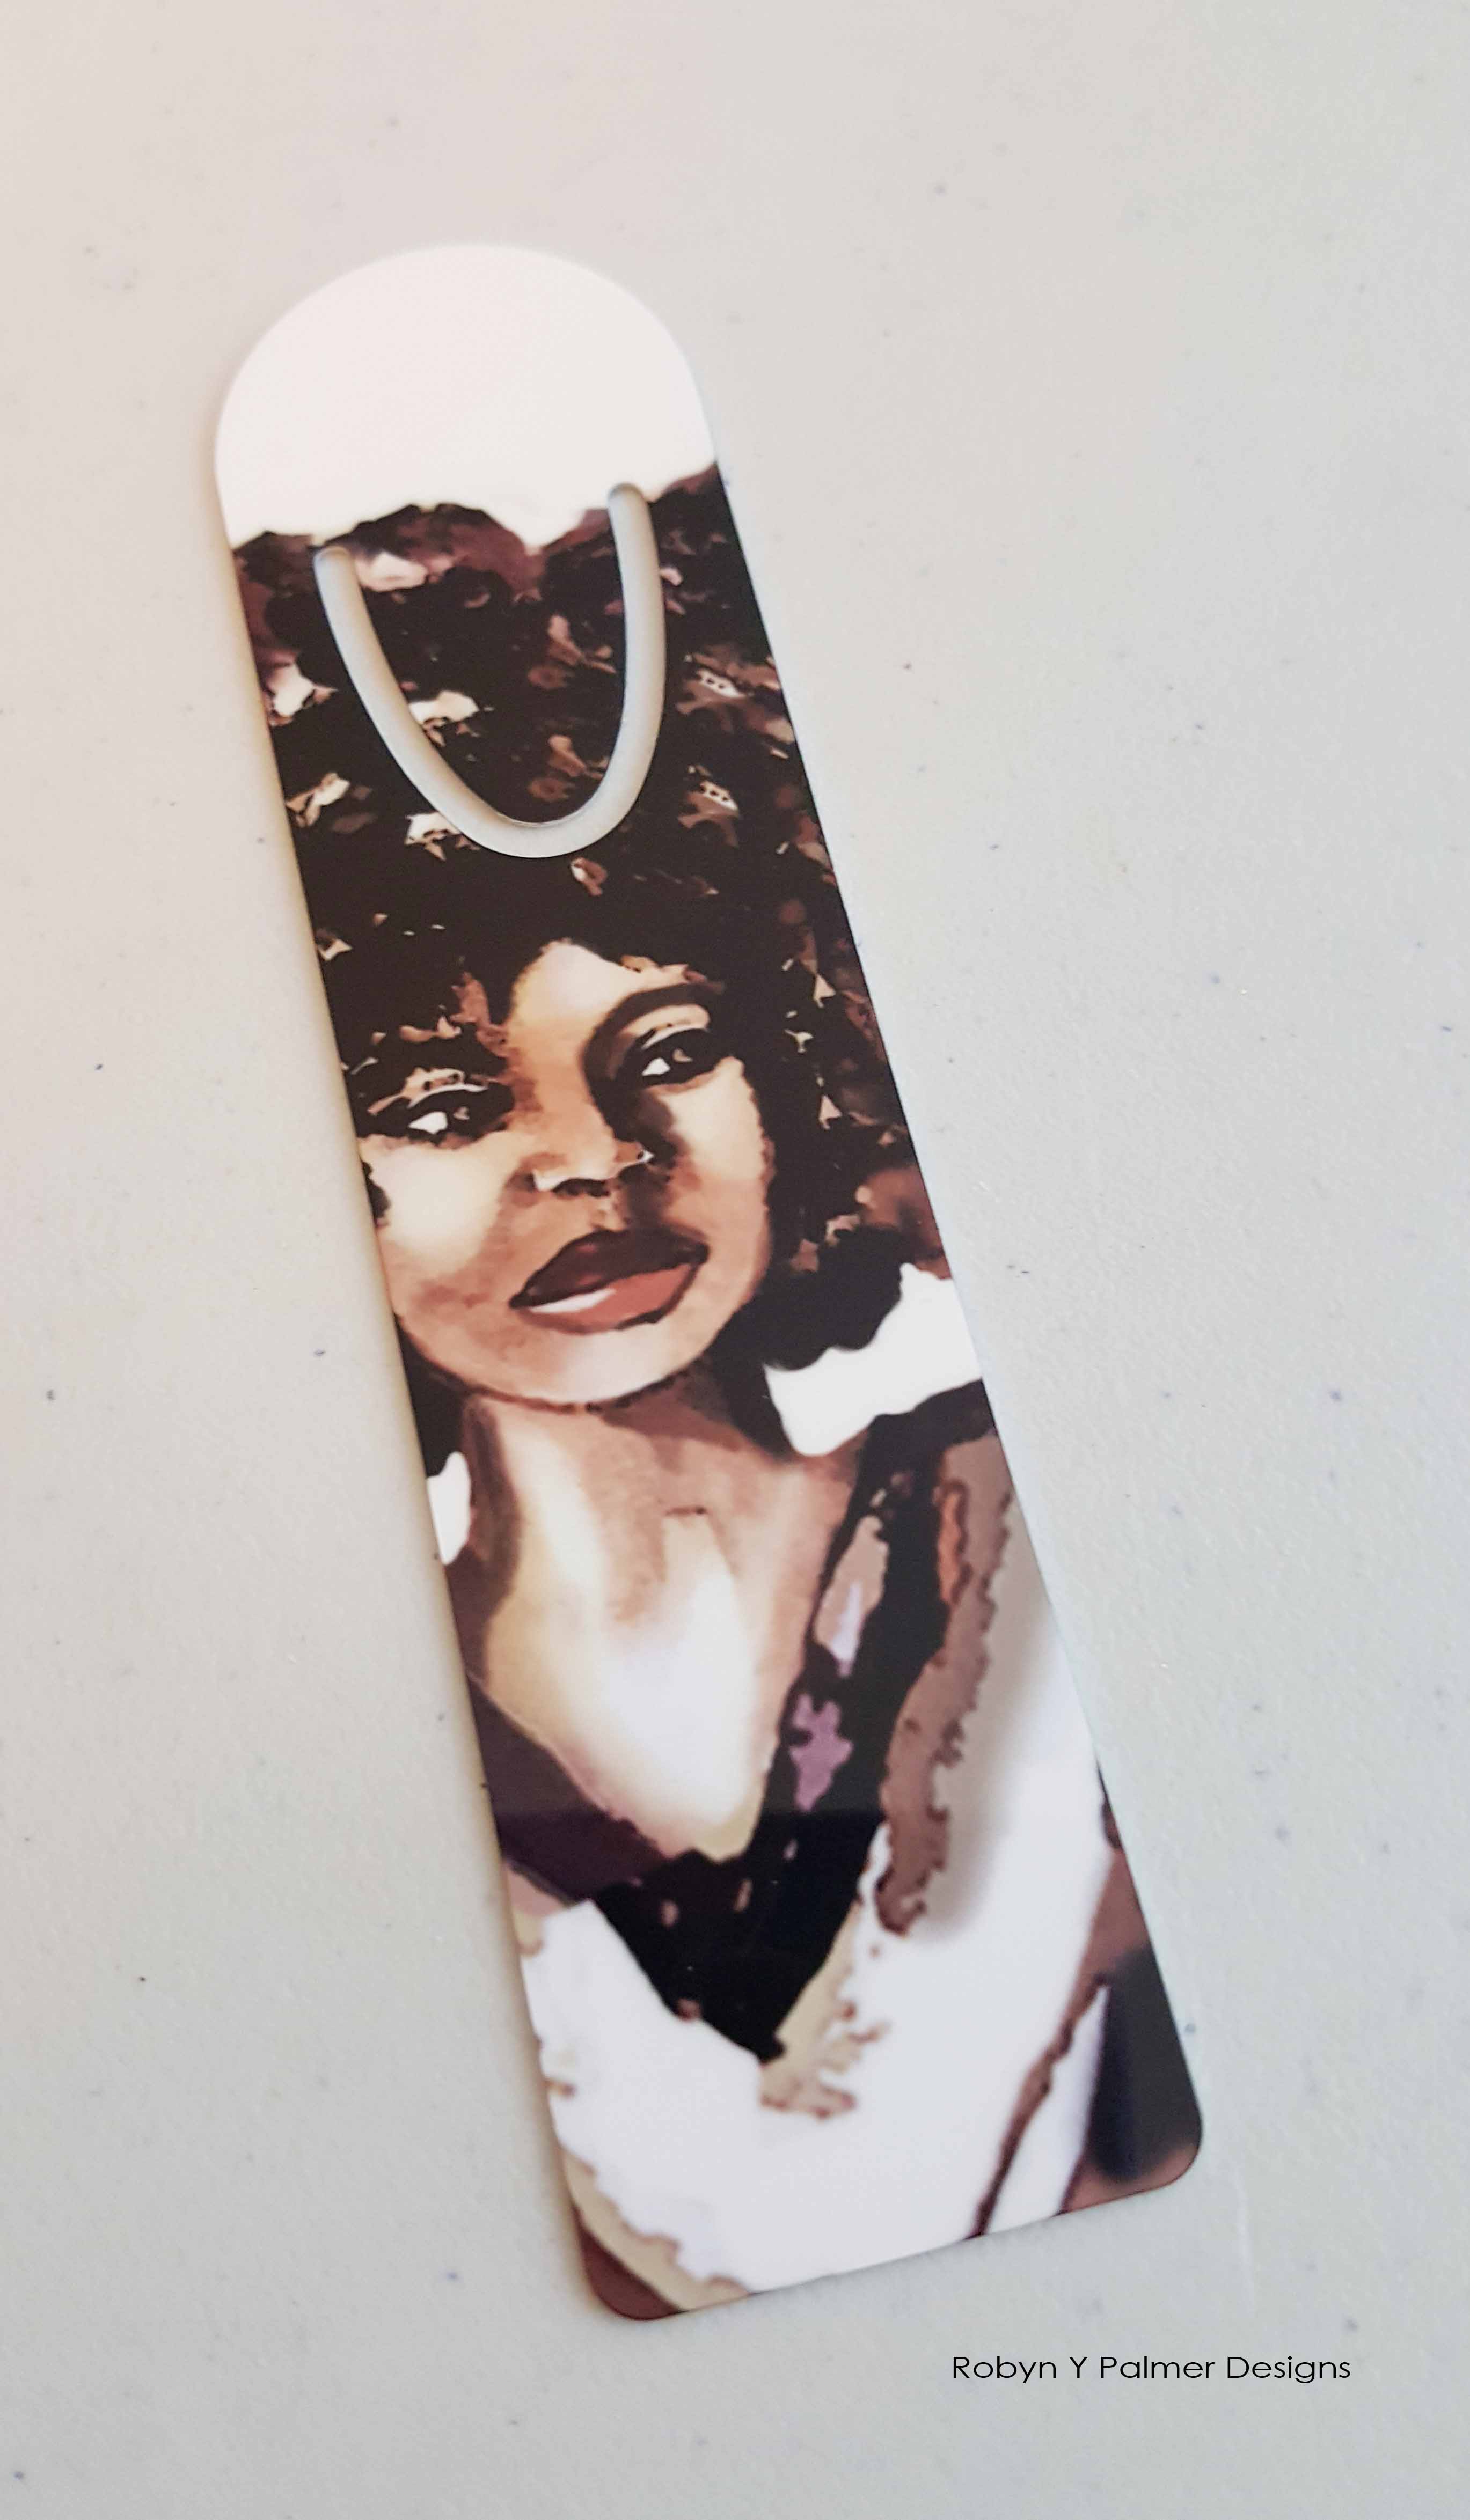 Bookmark - Body and Soul made with sublimation printing